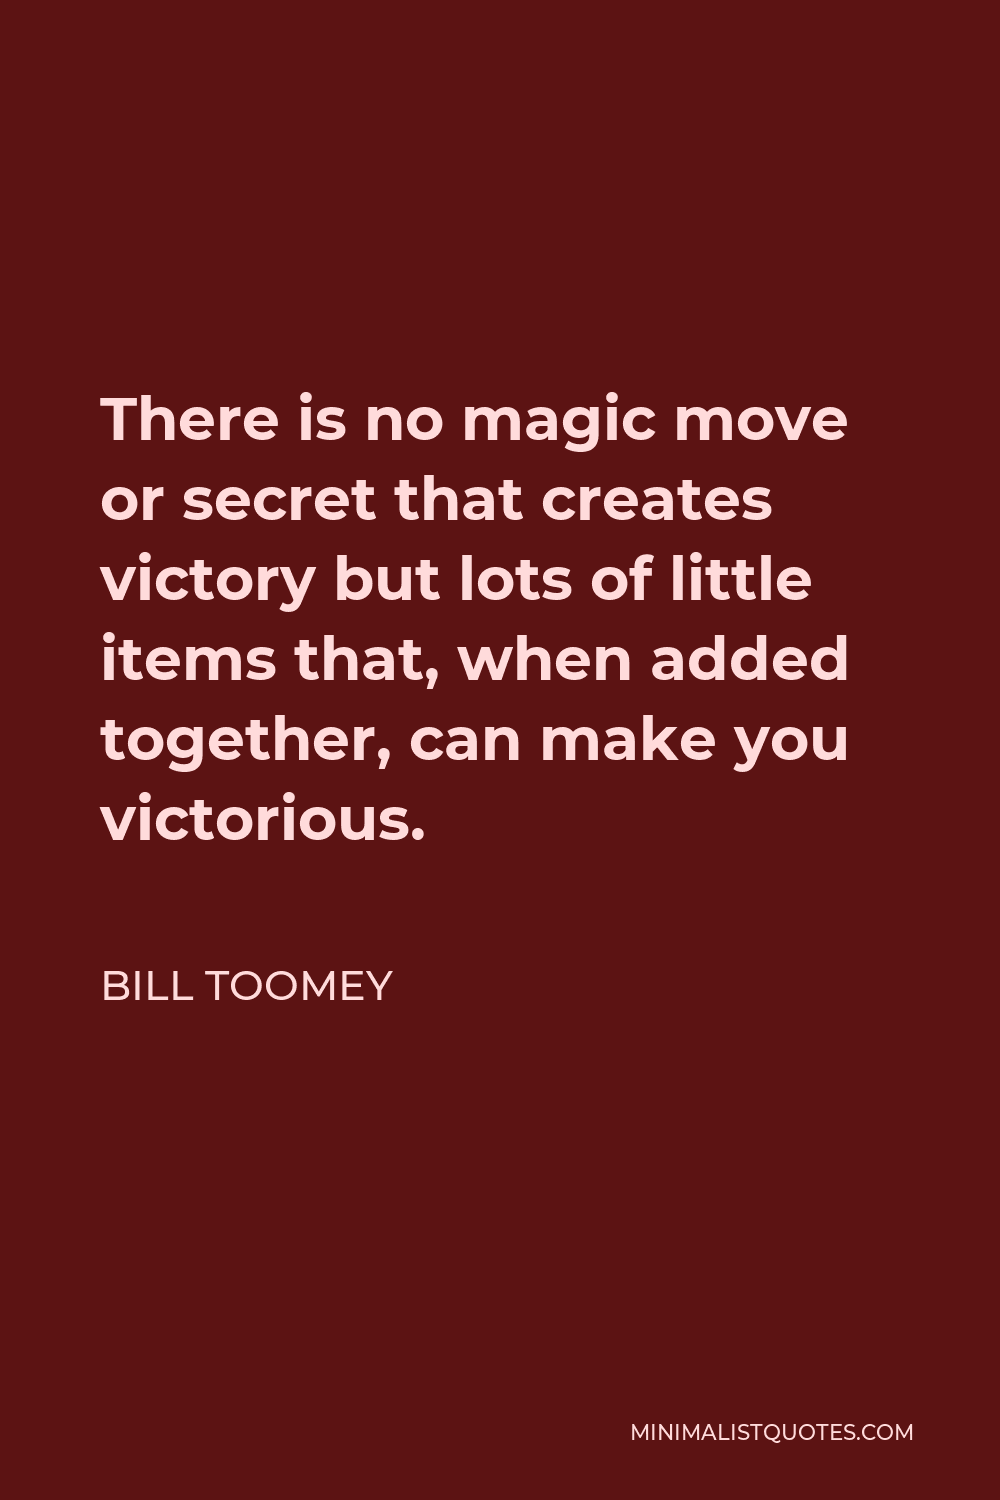 Bill Toomey Quote - There is no magic move or secret that creates victory but lots of little items that, when added together, can make you victorious.